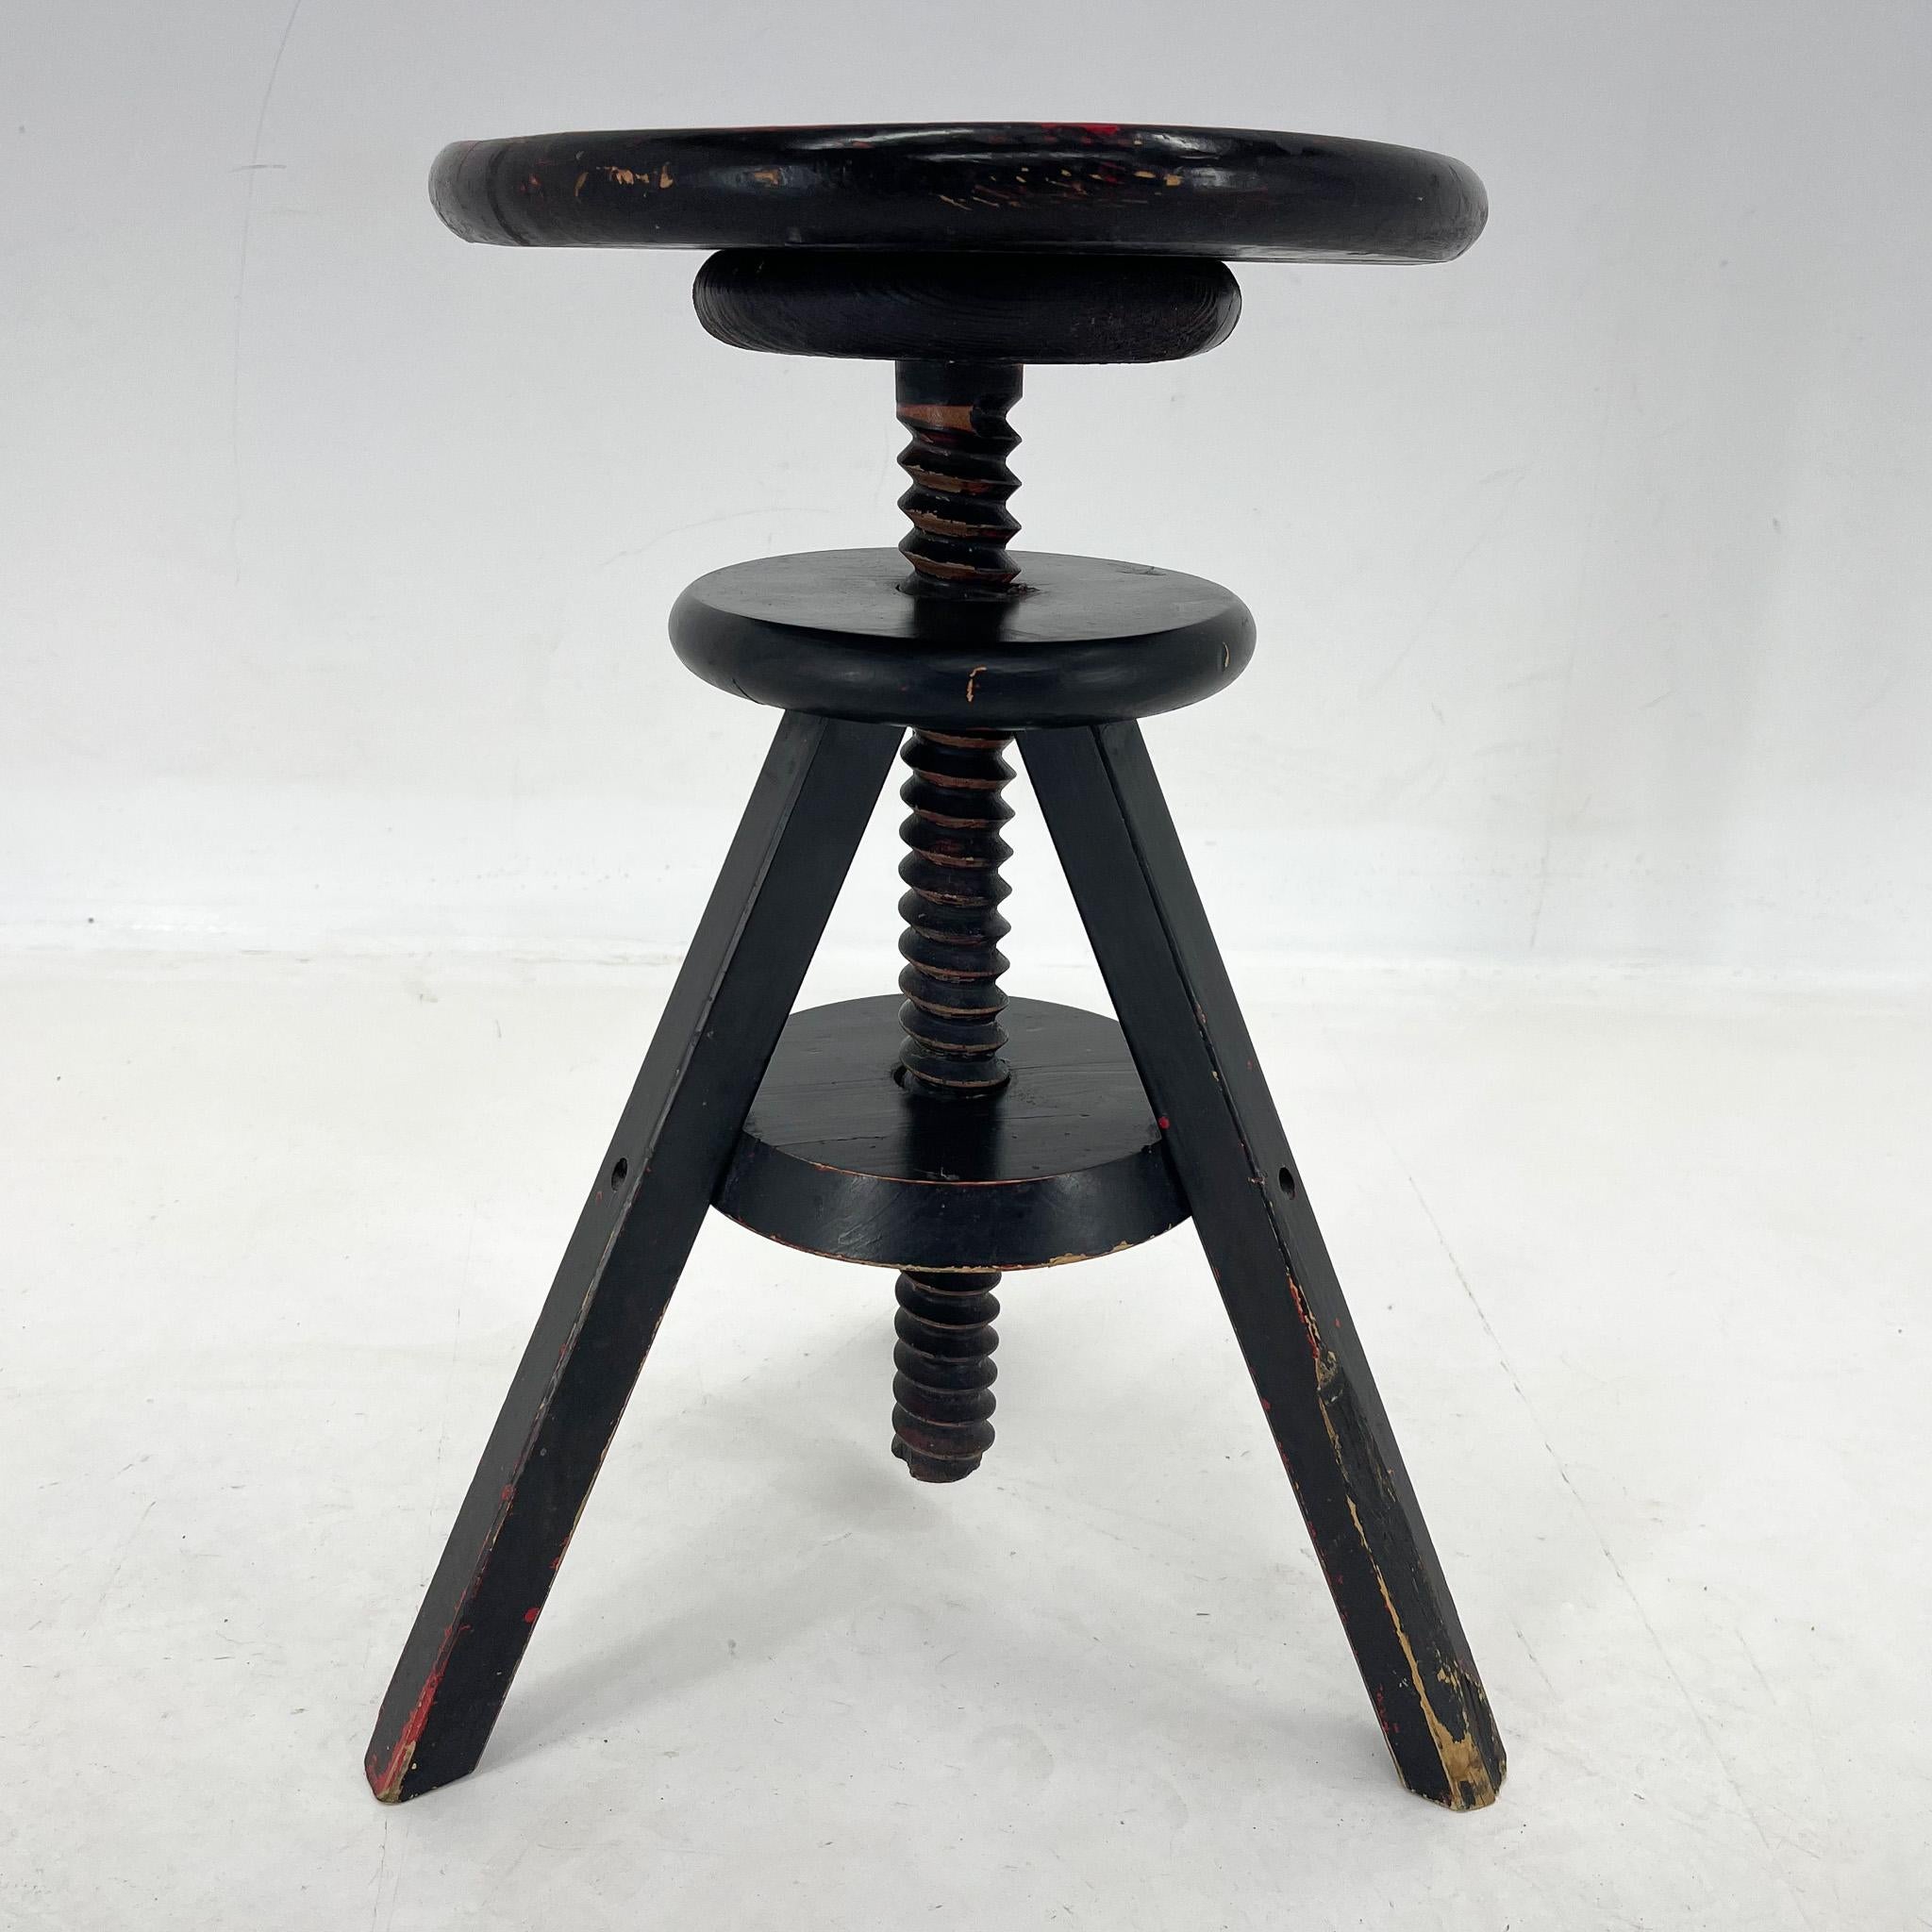 Stable whole wooden vintage stool with original patina. The hight is adjustable. The upper part has a diameter of 30 cm. The widest part at the ground is 39 cm. 61 cm is the maximum hight.